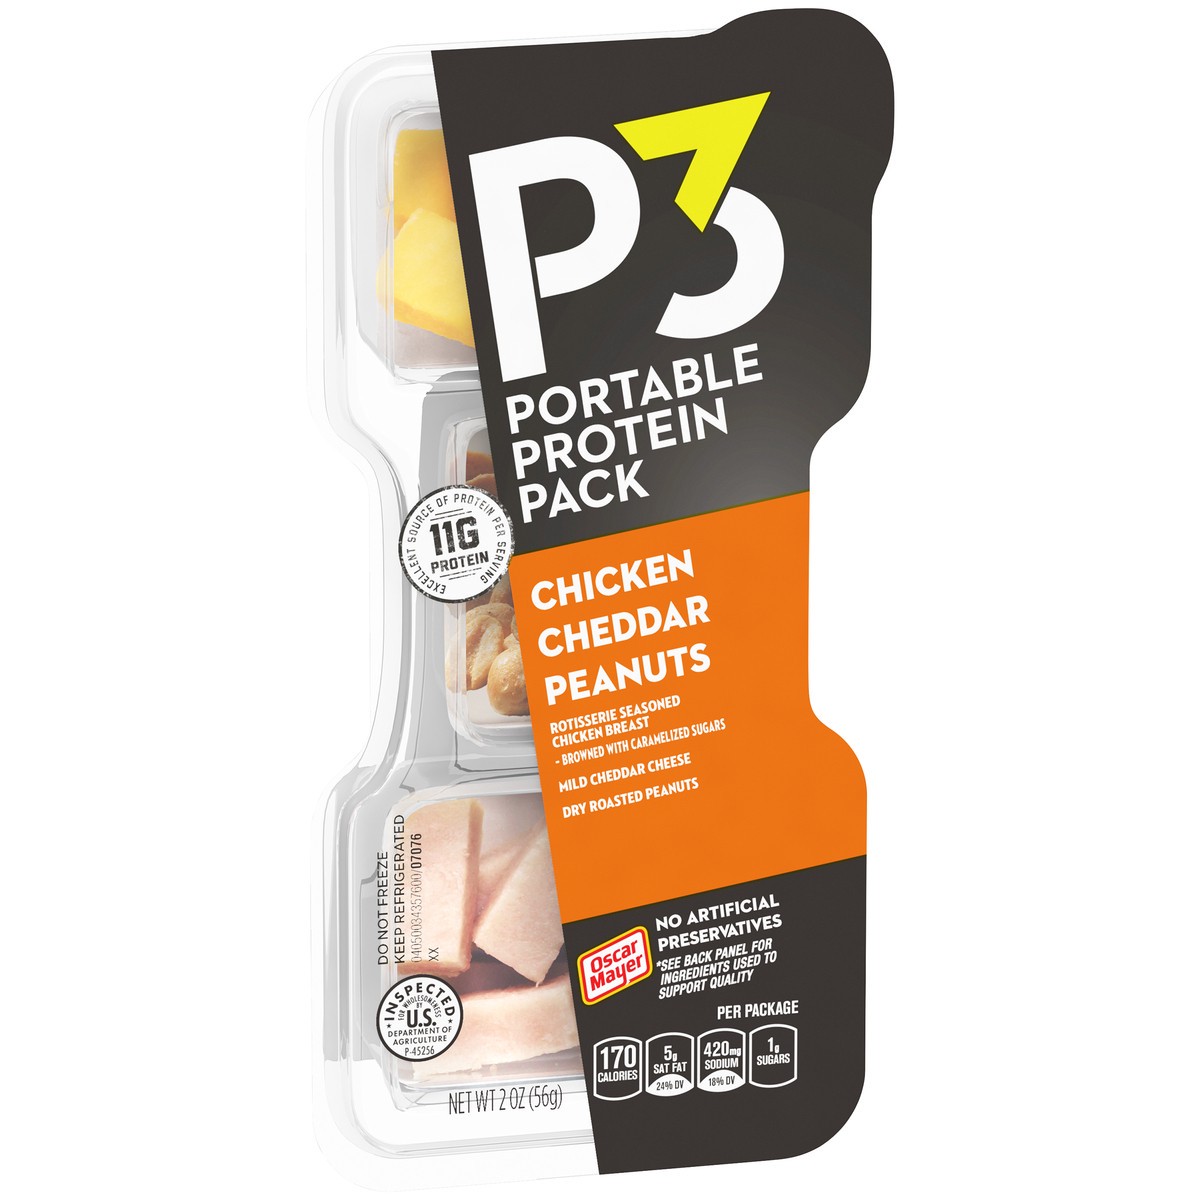 slide 8 of 9, P3 Portable Protein Snack Pack with Chicken, Peanuts & Cheddar Cheese, 2 oz Tray, 2 oz